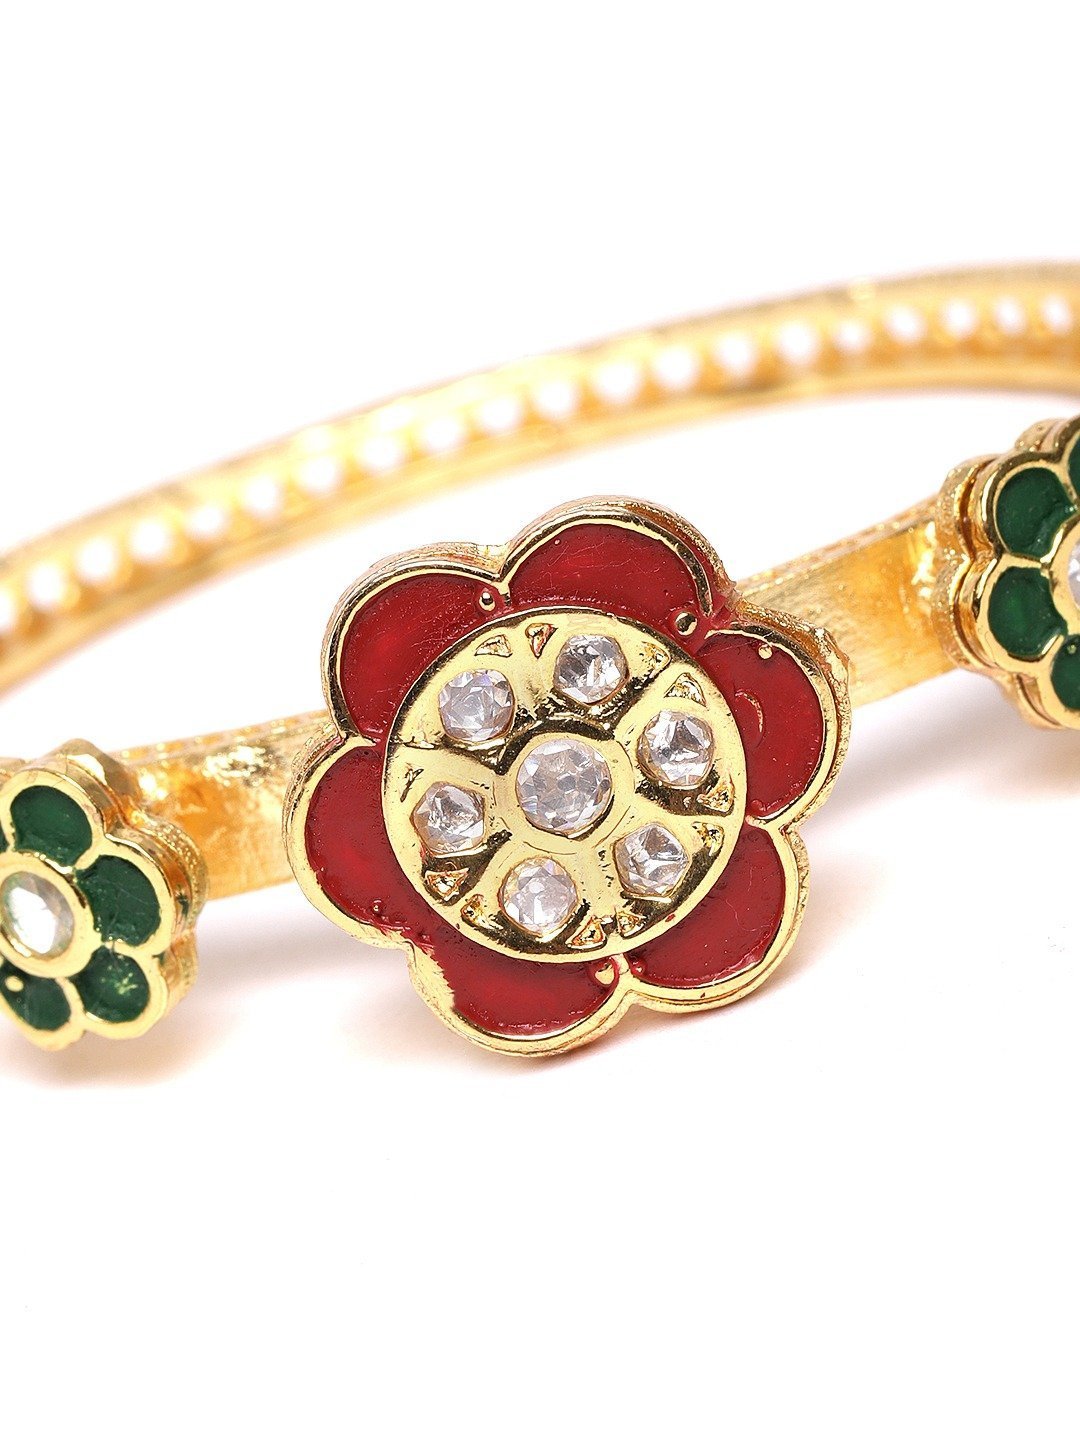 Women's Handcrafted Floral Red and Green Bracelet - Priyaasi